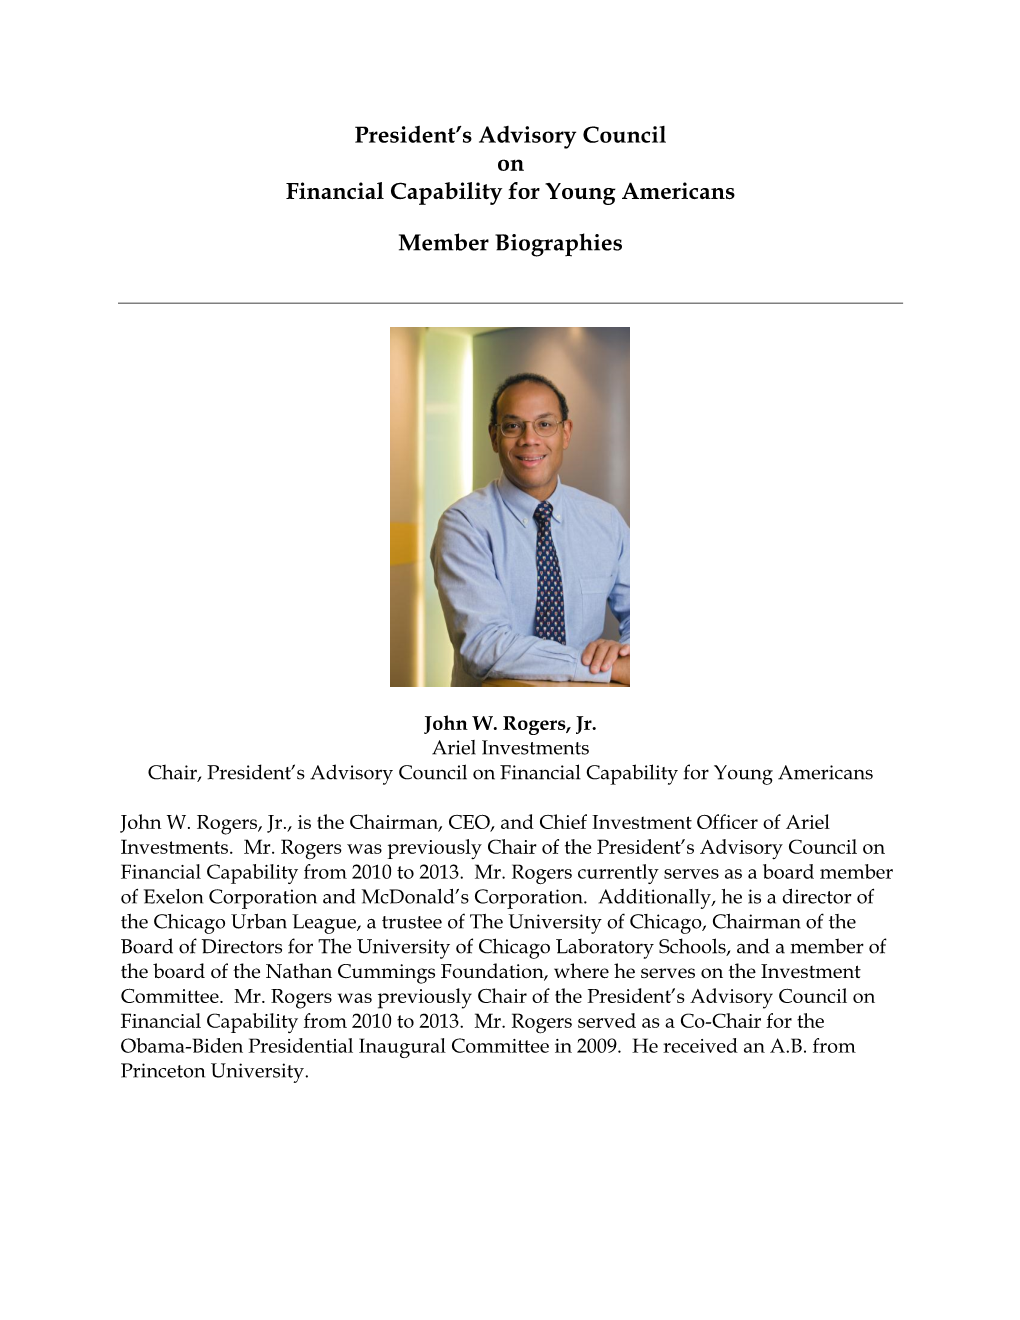 President's Advisory Council on Financial Capability for Young